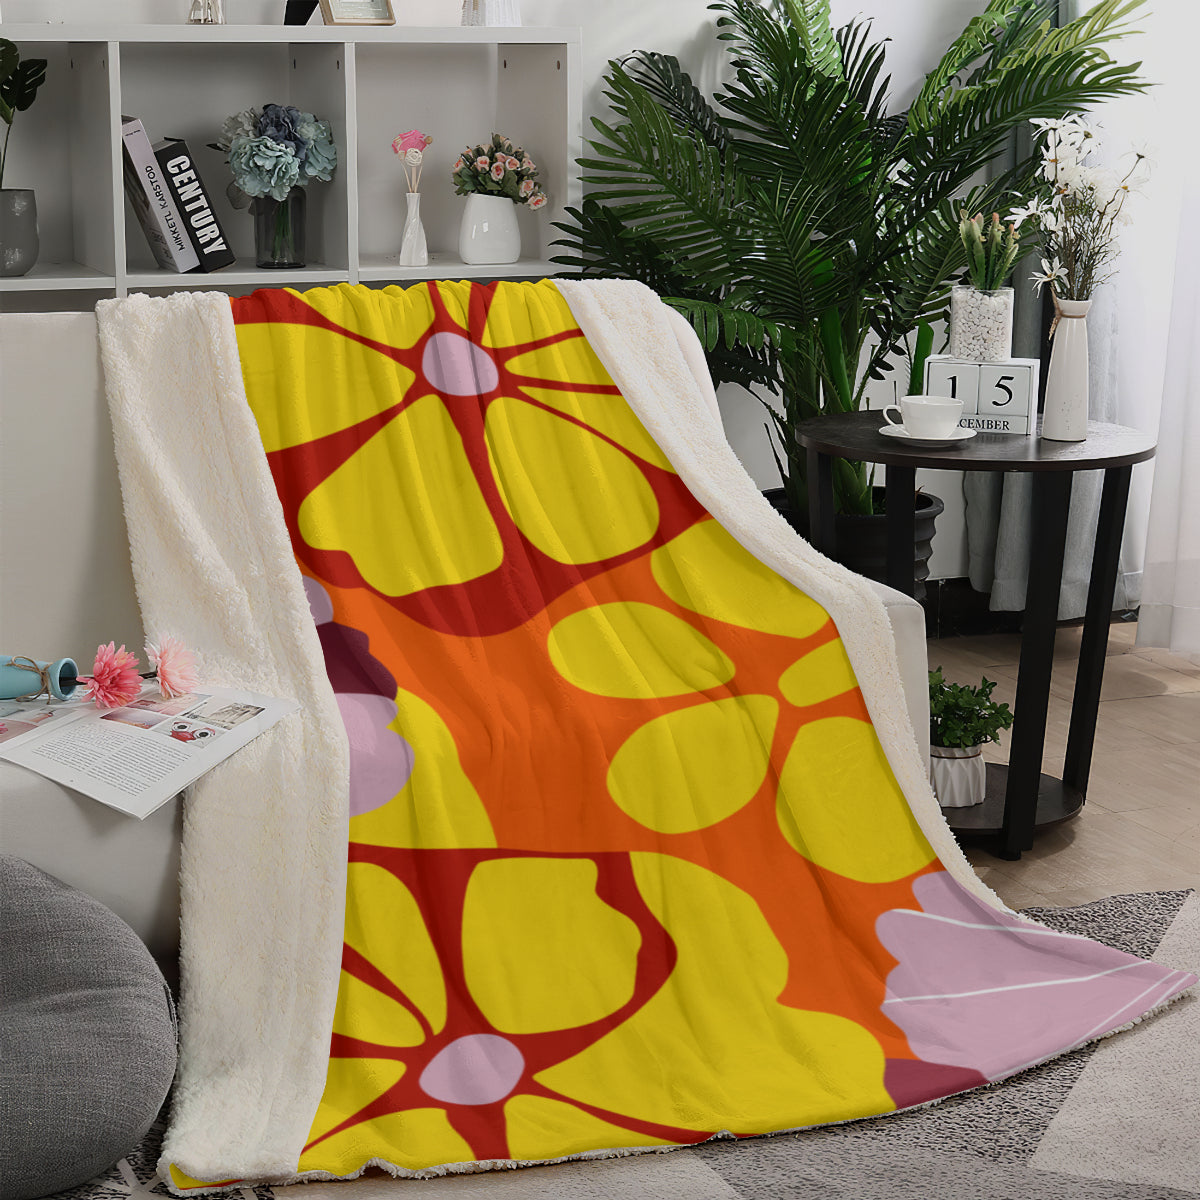 Vampire Art Retro Bold Chic Florals Sherpa Thick Blanket - Orange and Yellow with Lilac